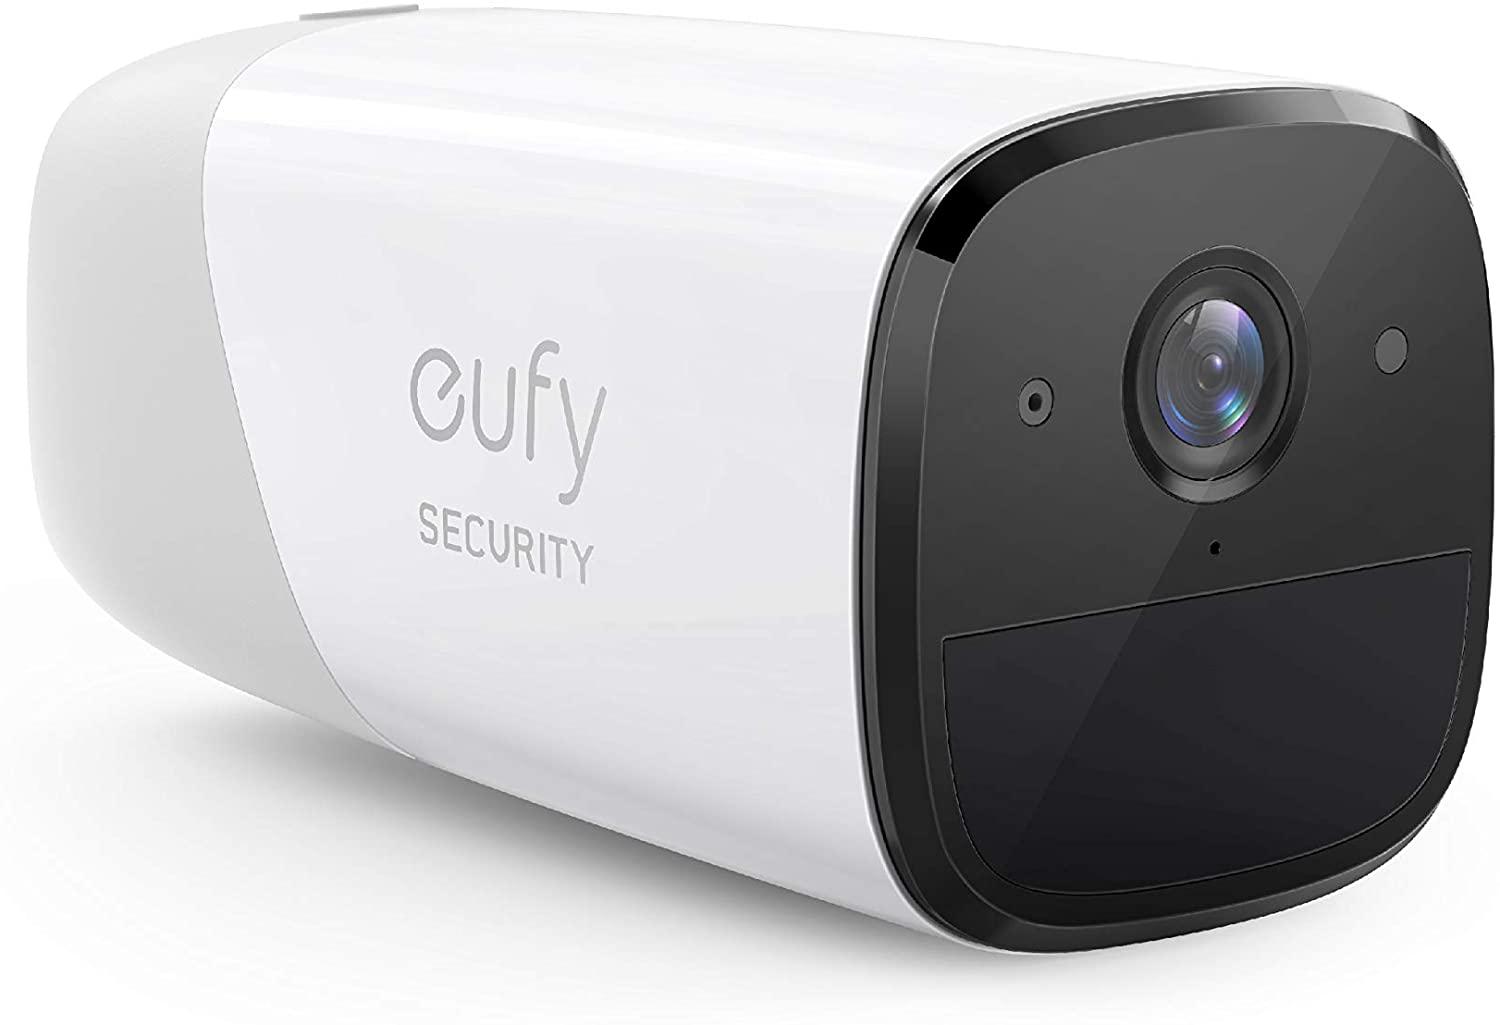 eufyCam 2 Wireless Home Security Camera for $99.99 Shipped